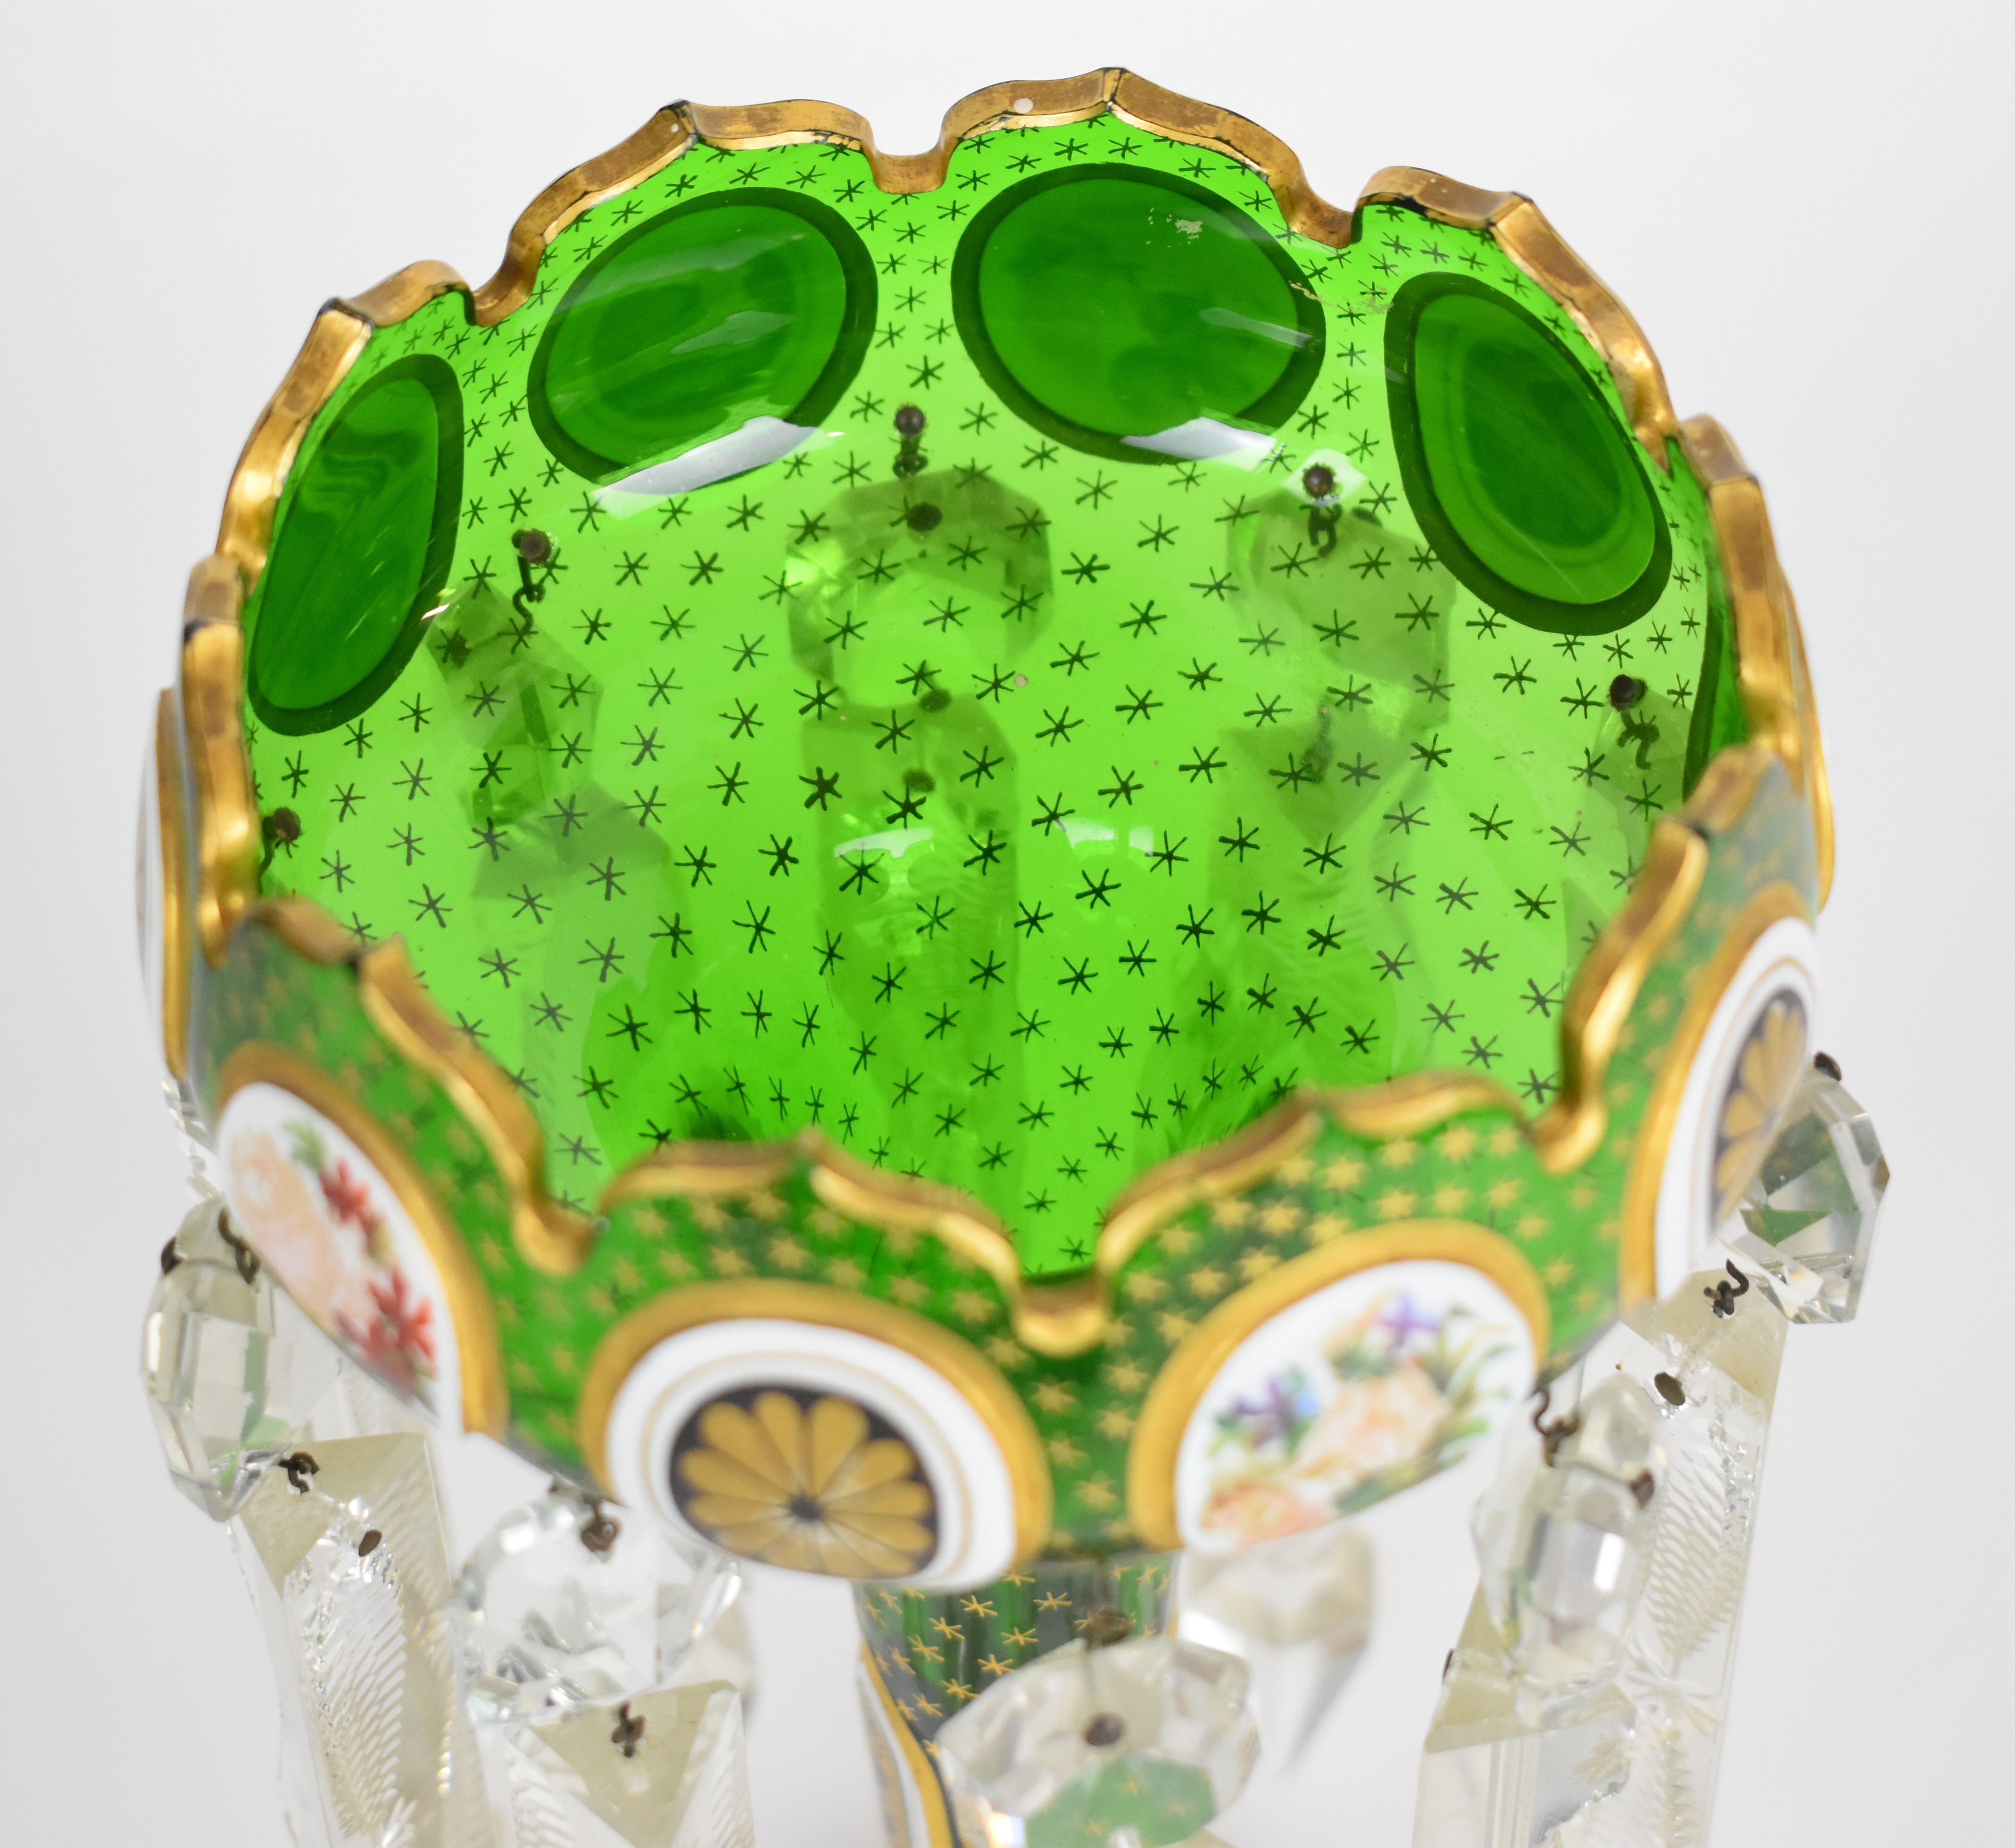 Victorian overlaid glass lustre vase with floral and gilt decoration over a green ground and clear - Image 3 of 6